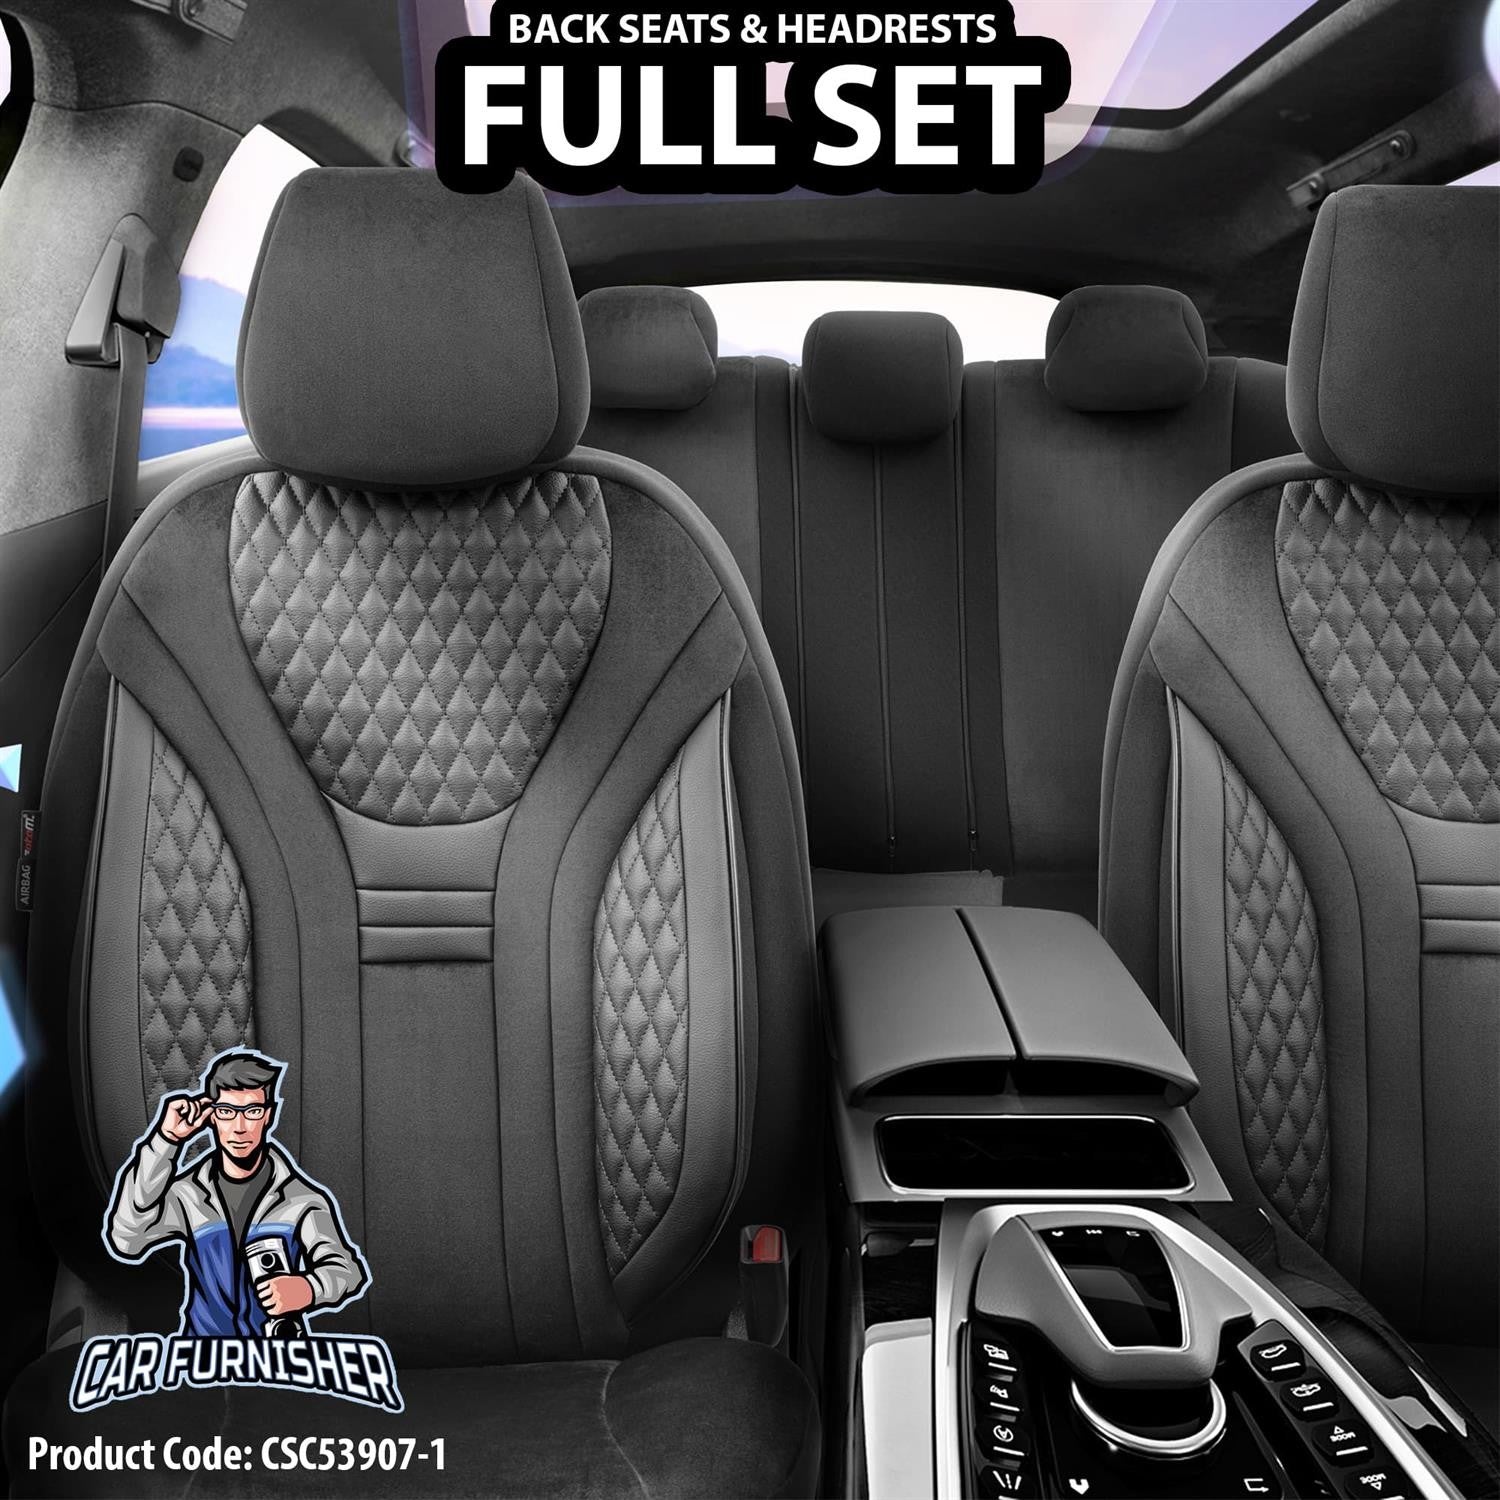 Luxury Car Seat Cover Set (3 Colors) | Infinity Series Black 5 Seats + Headrests (Full Set) Leather & Fabric